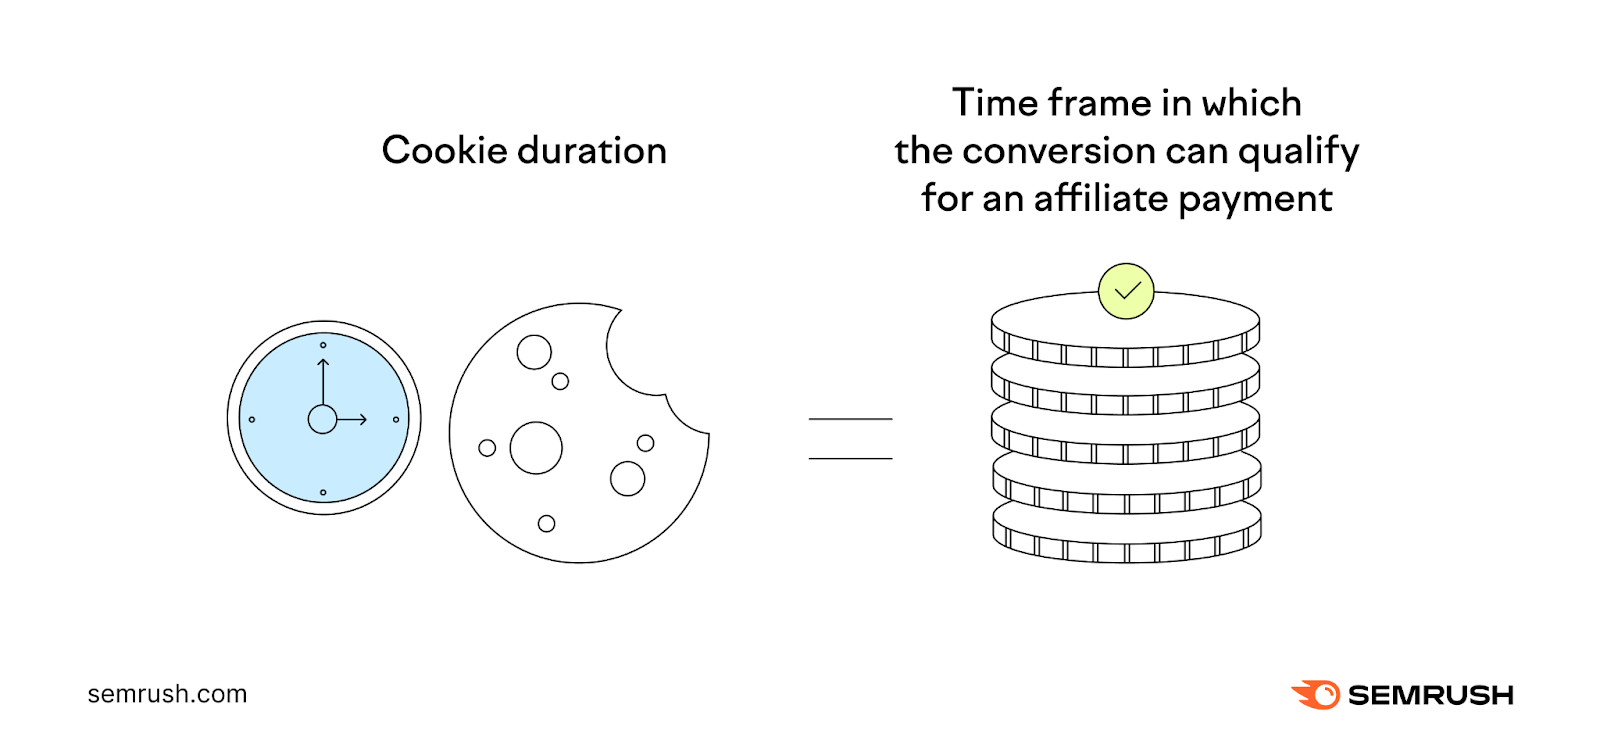 Cookie duration is a time frame in which the conversion can qualify for an affiliate payment